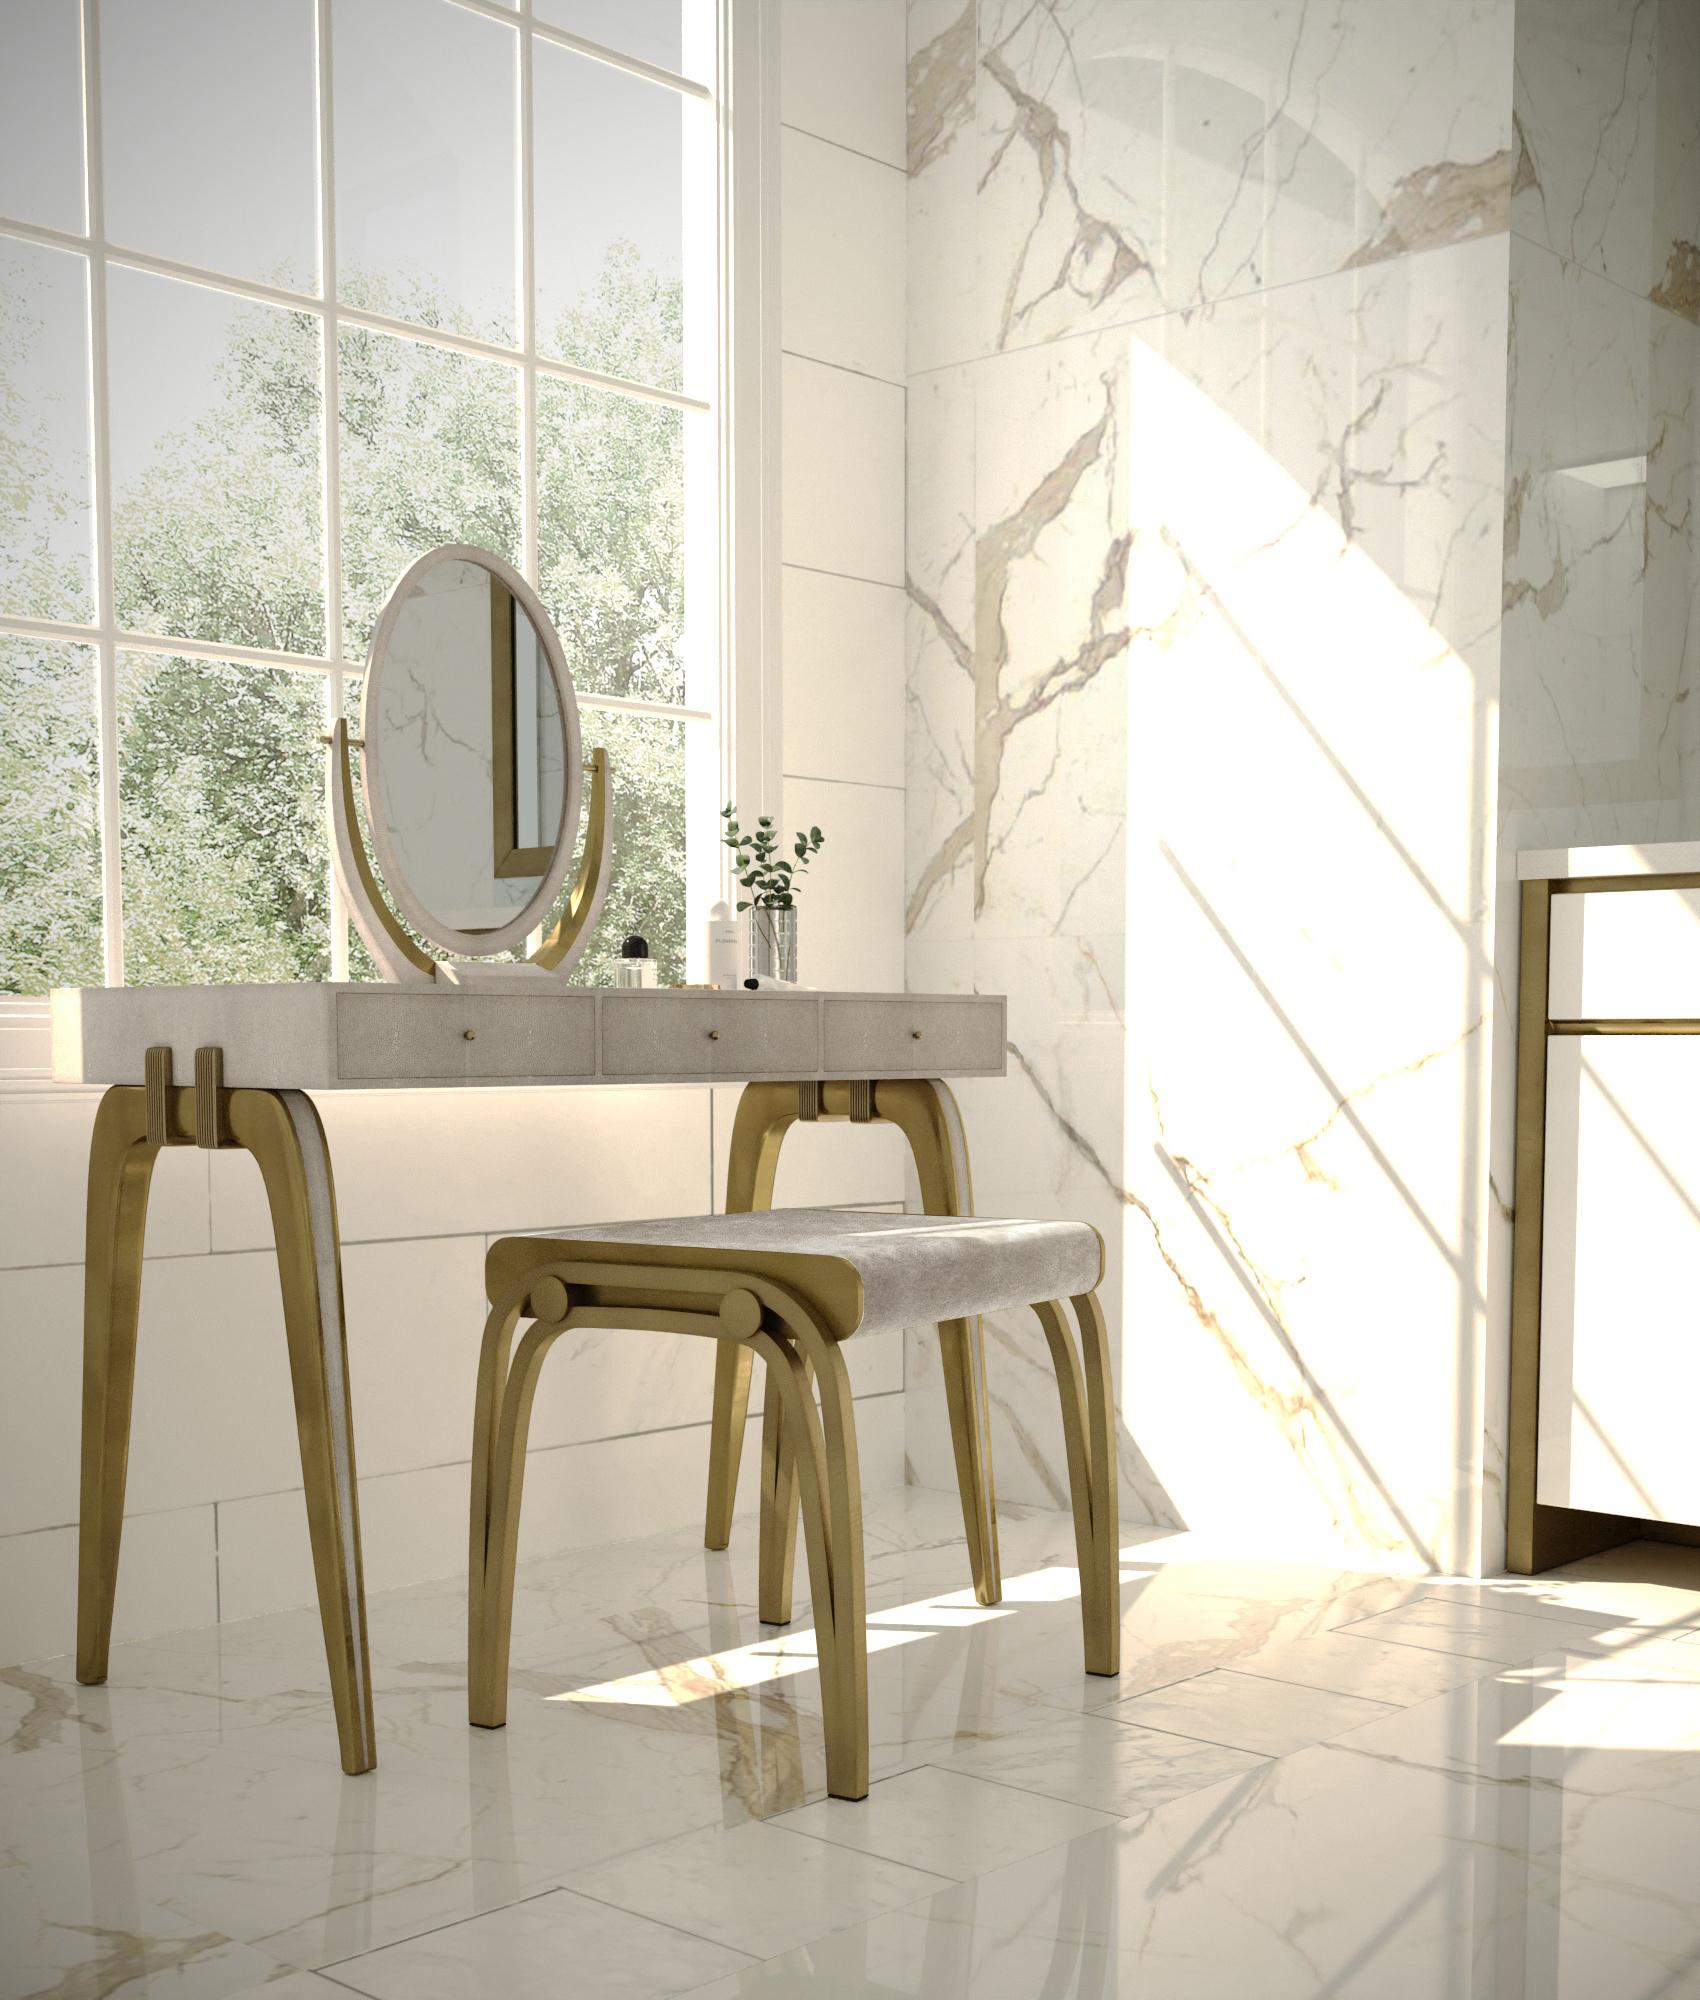 The Sonia vanity set in cream shagreen and bronze-patina brass by R&Y Augousti, is the perfect piece for your bedroom or bathroom. The removable mirror is elegant and the angles can be adjusted. The Victoria stool upholstered in a creamy-taupe